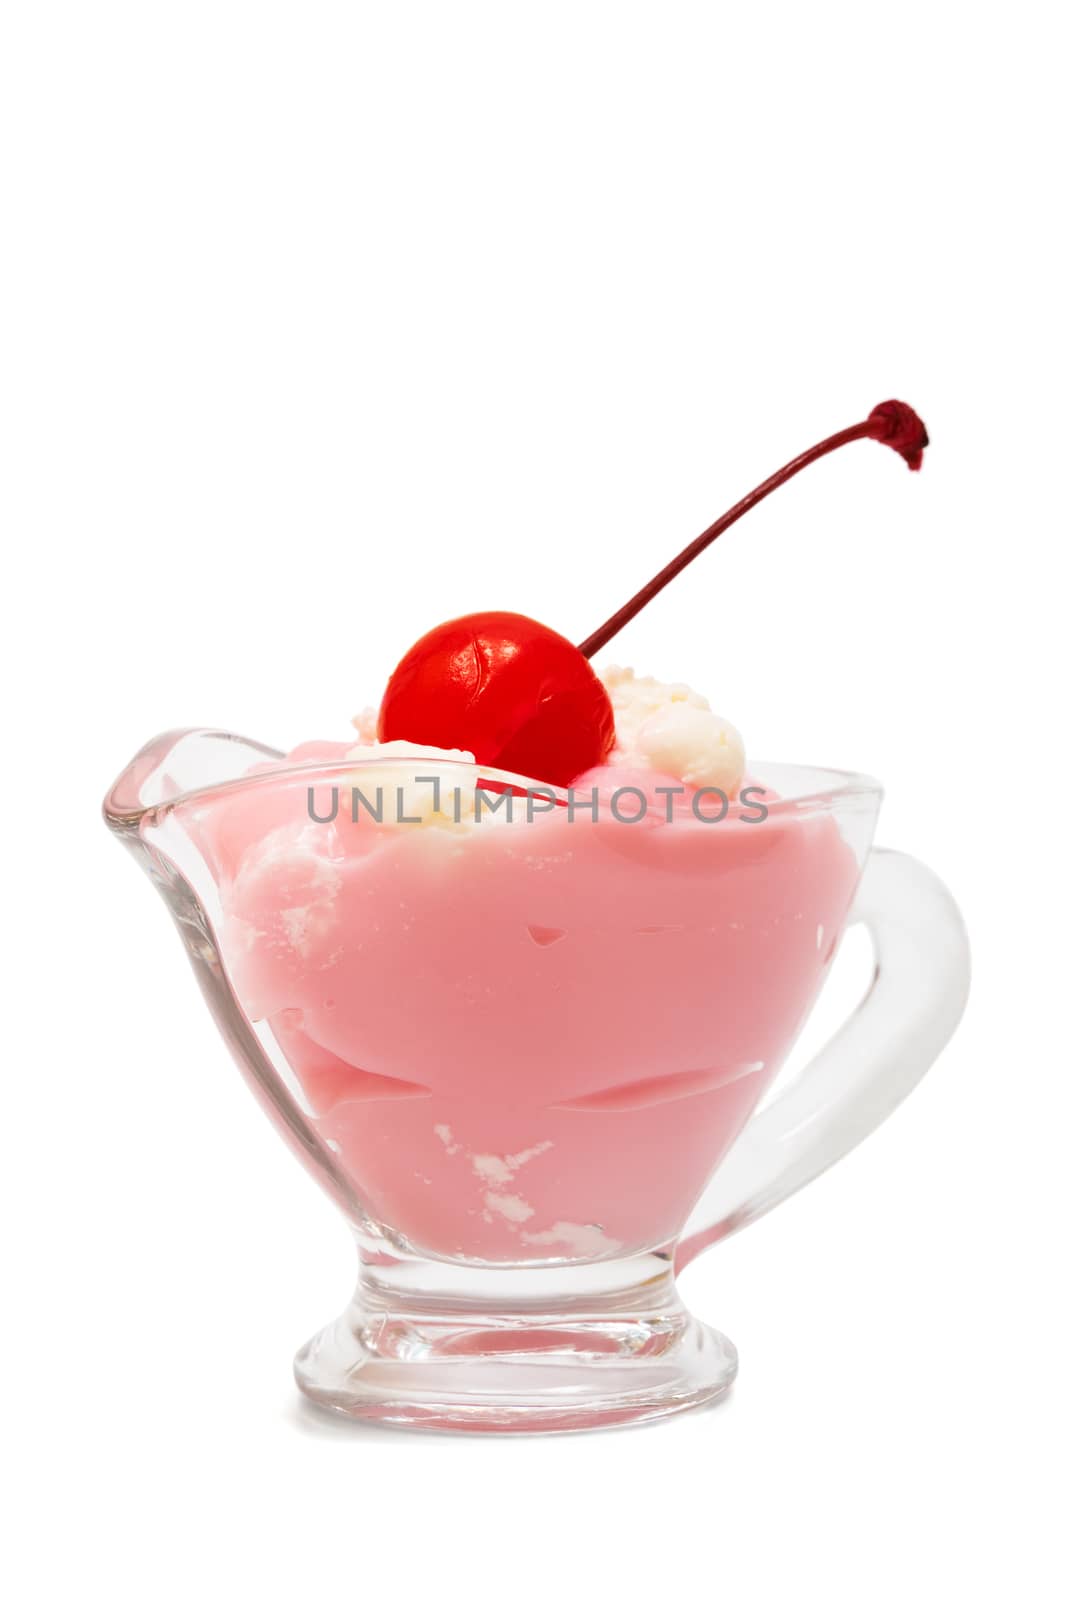 ice cream with a cherry by terex